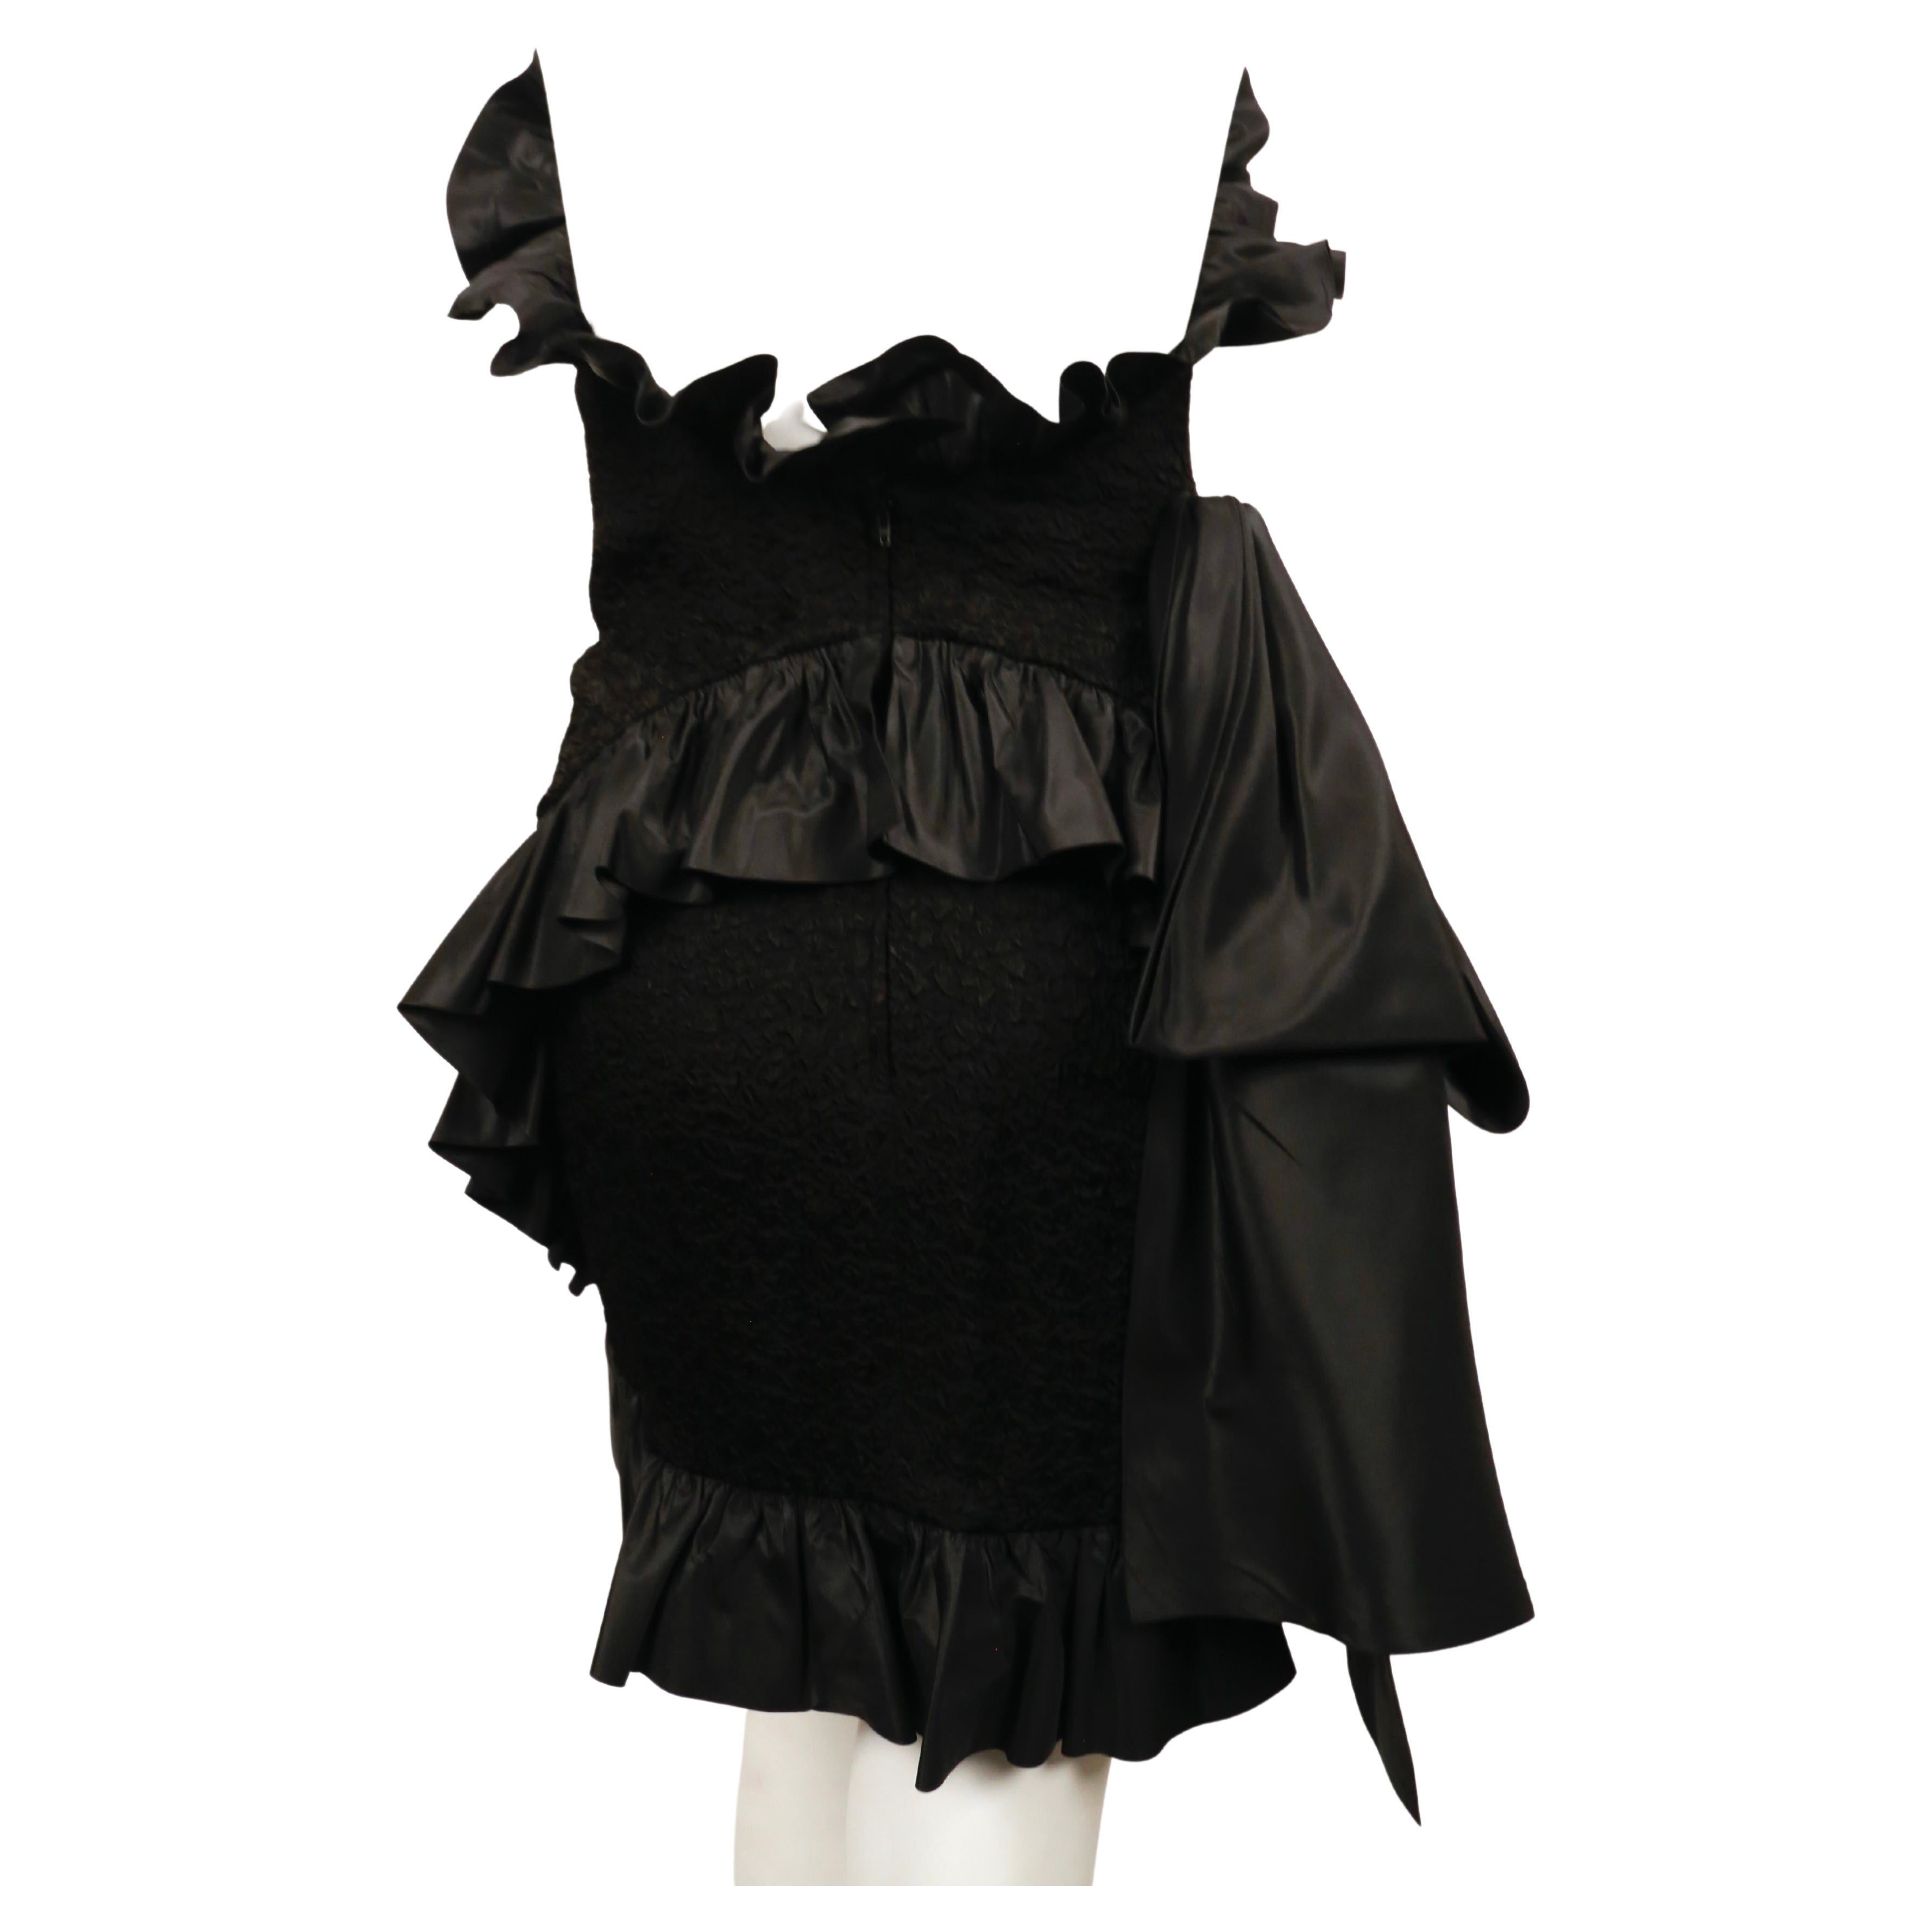 1980's YVES SAINT LAURENT black strapless dress with ruffles and bow For Sale 2